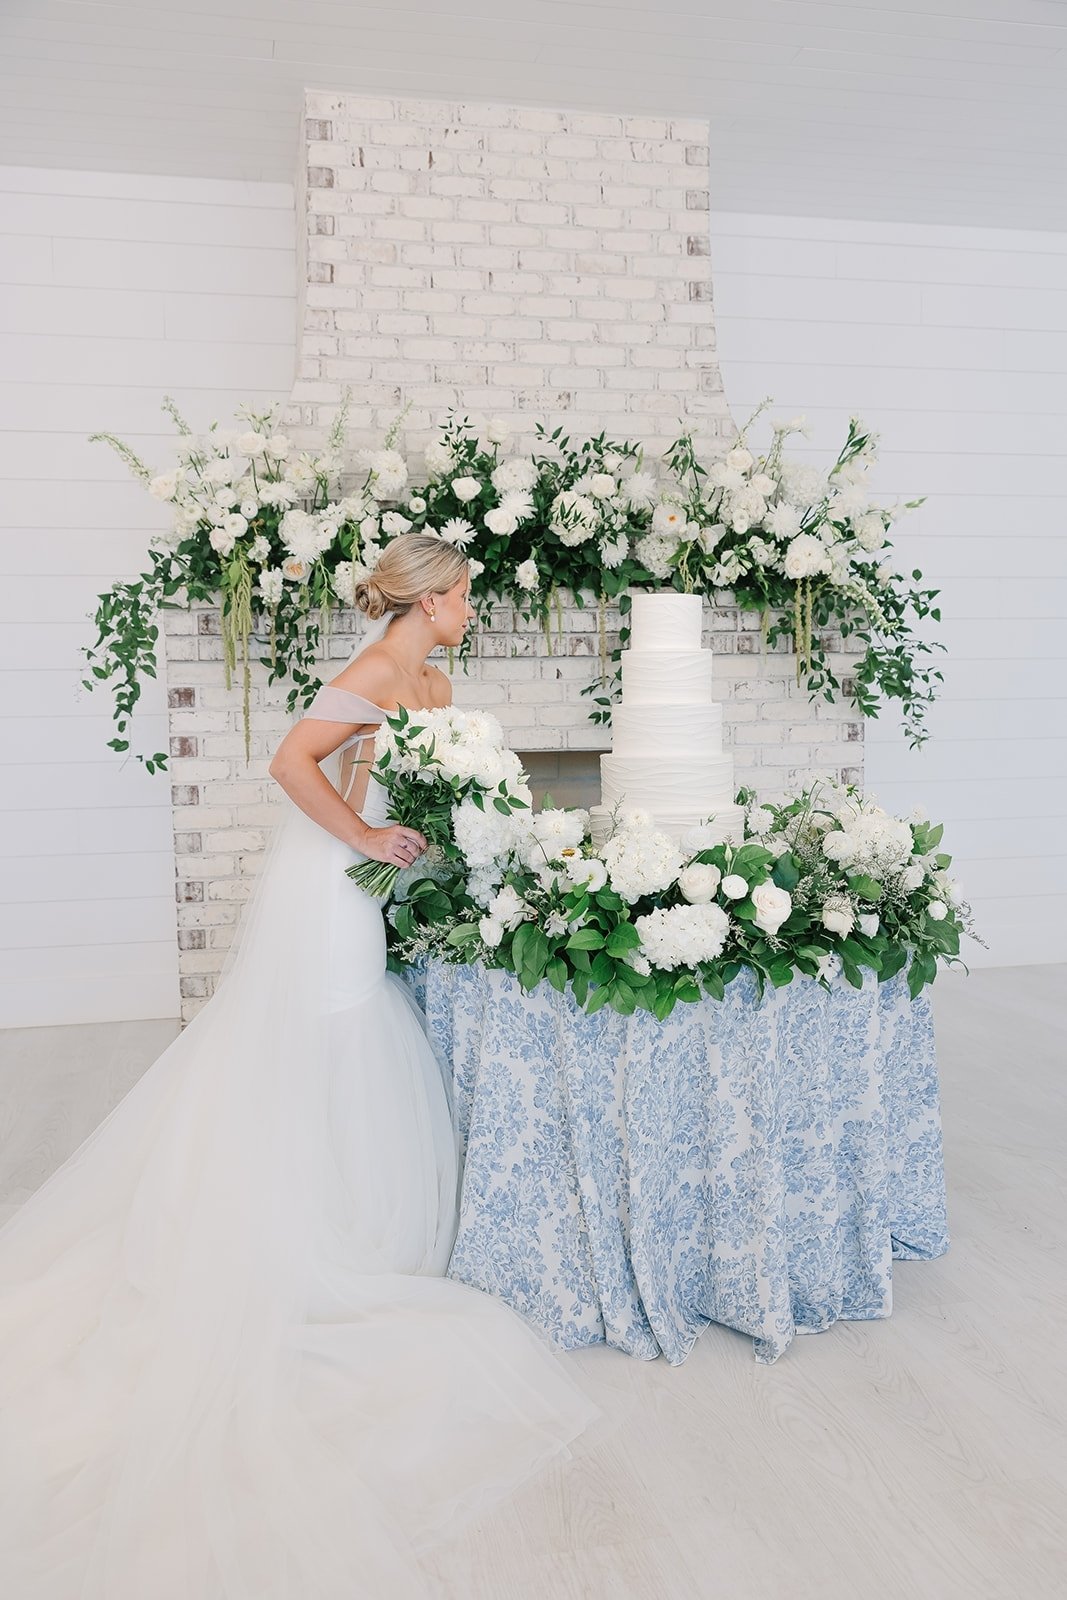 Find a better cake photo, we'll wait. 
@blushbakingco, @nicolecolwelldesignandco, and @itsheatherchipps collaborated with us to create a MOMENT. Here's to all the 2024 moments-we can't wait!

Now booking 2025 weddings!

#ivyrosebarn #weddingfireplace